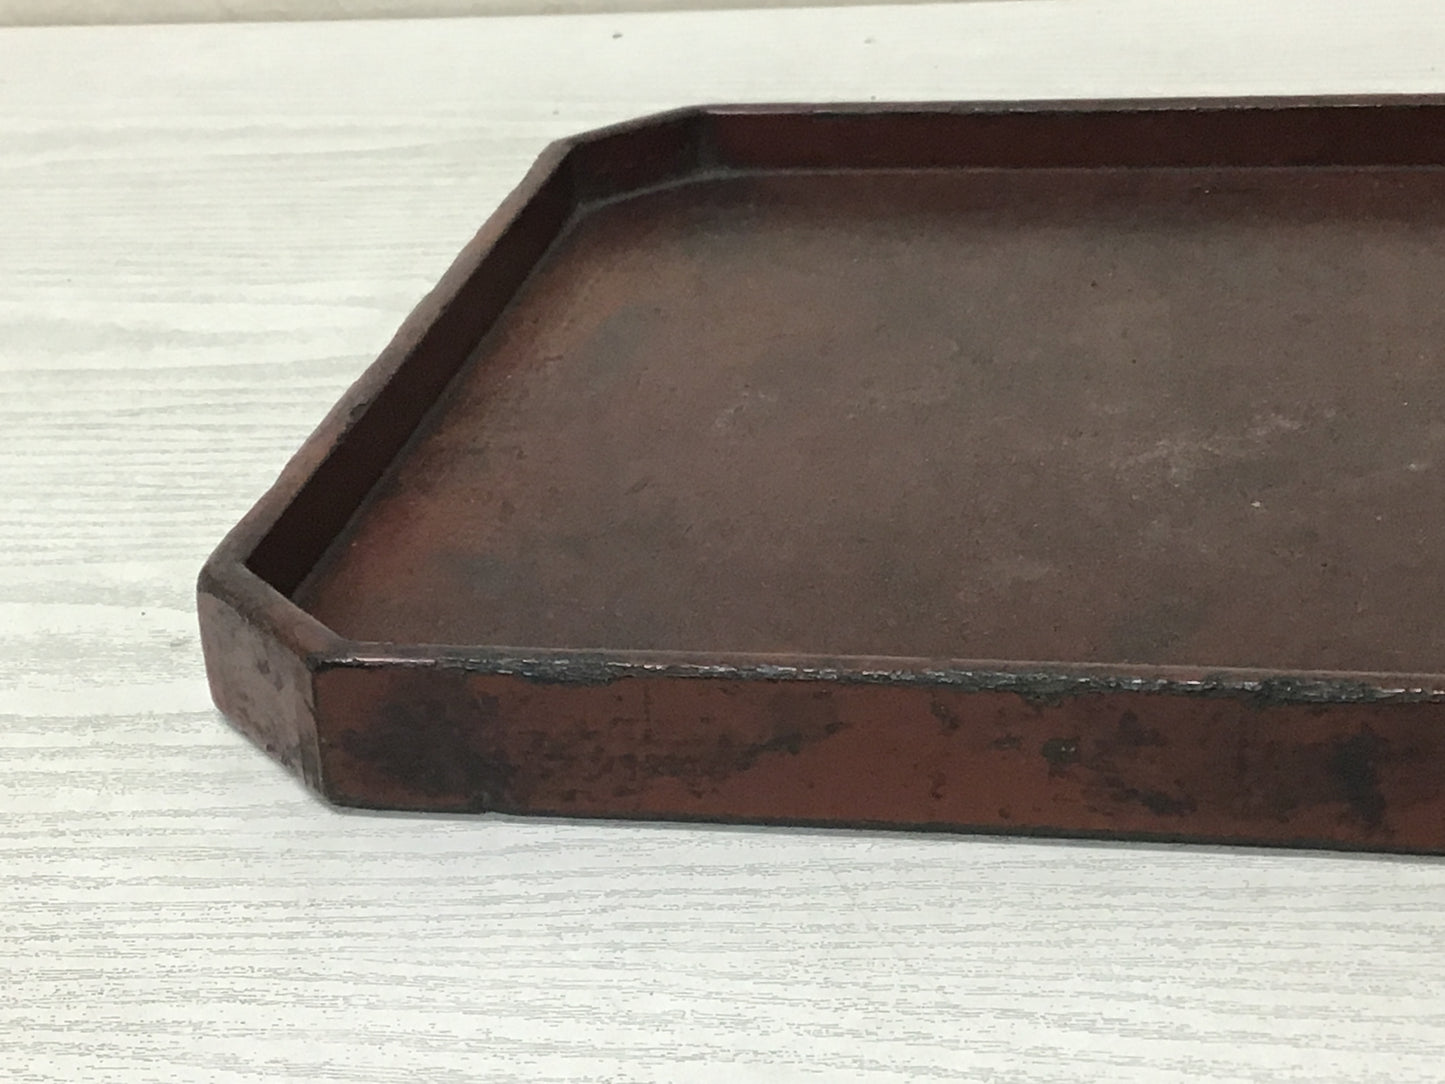 Y2426 TRAY Negoro lacquerware splayed OBON OZEN signed box Japan antique vintage